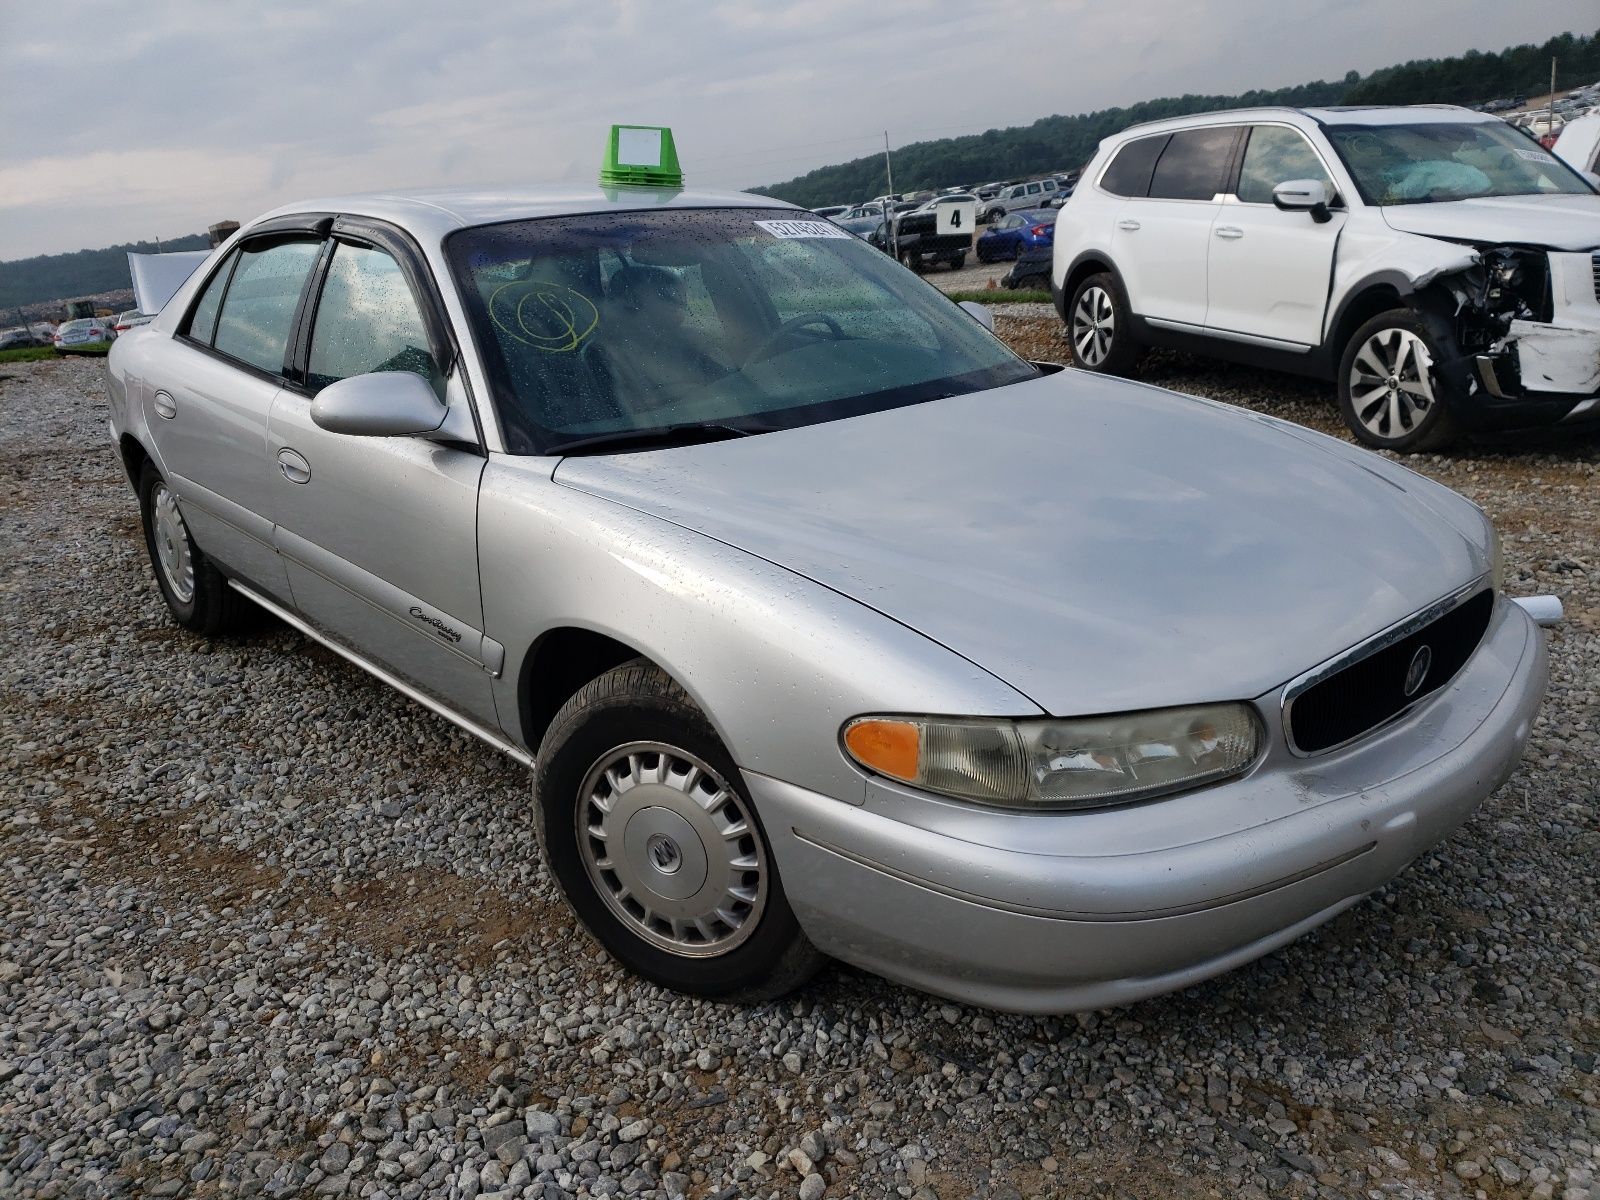 1 of 2G4WY55J0Y1285800 Buick Century 2000